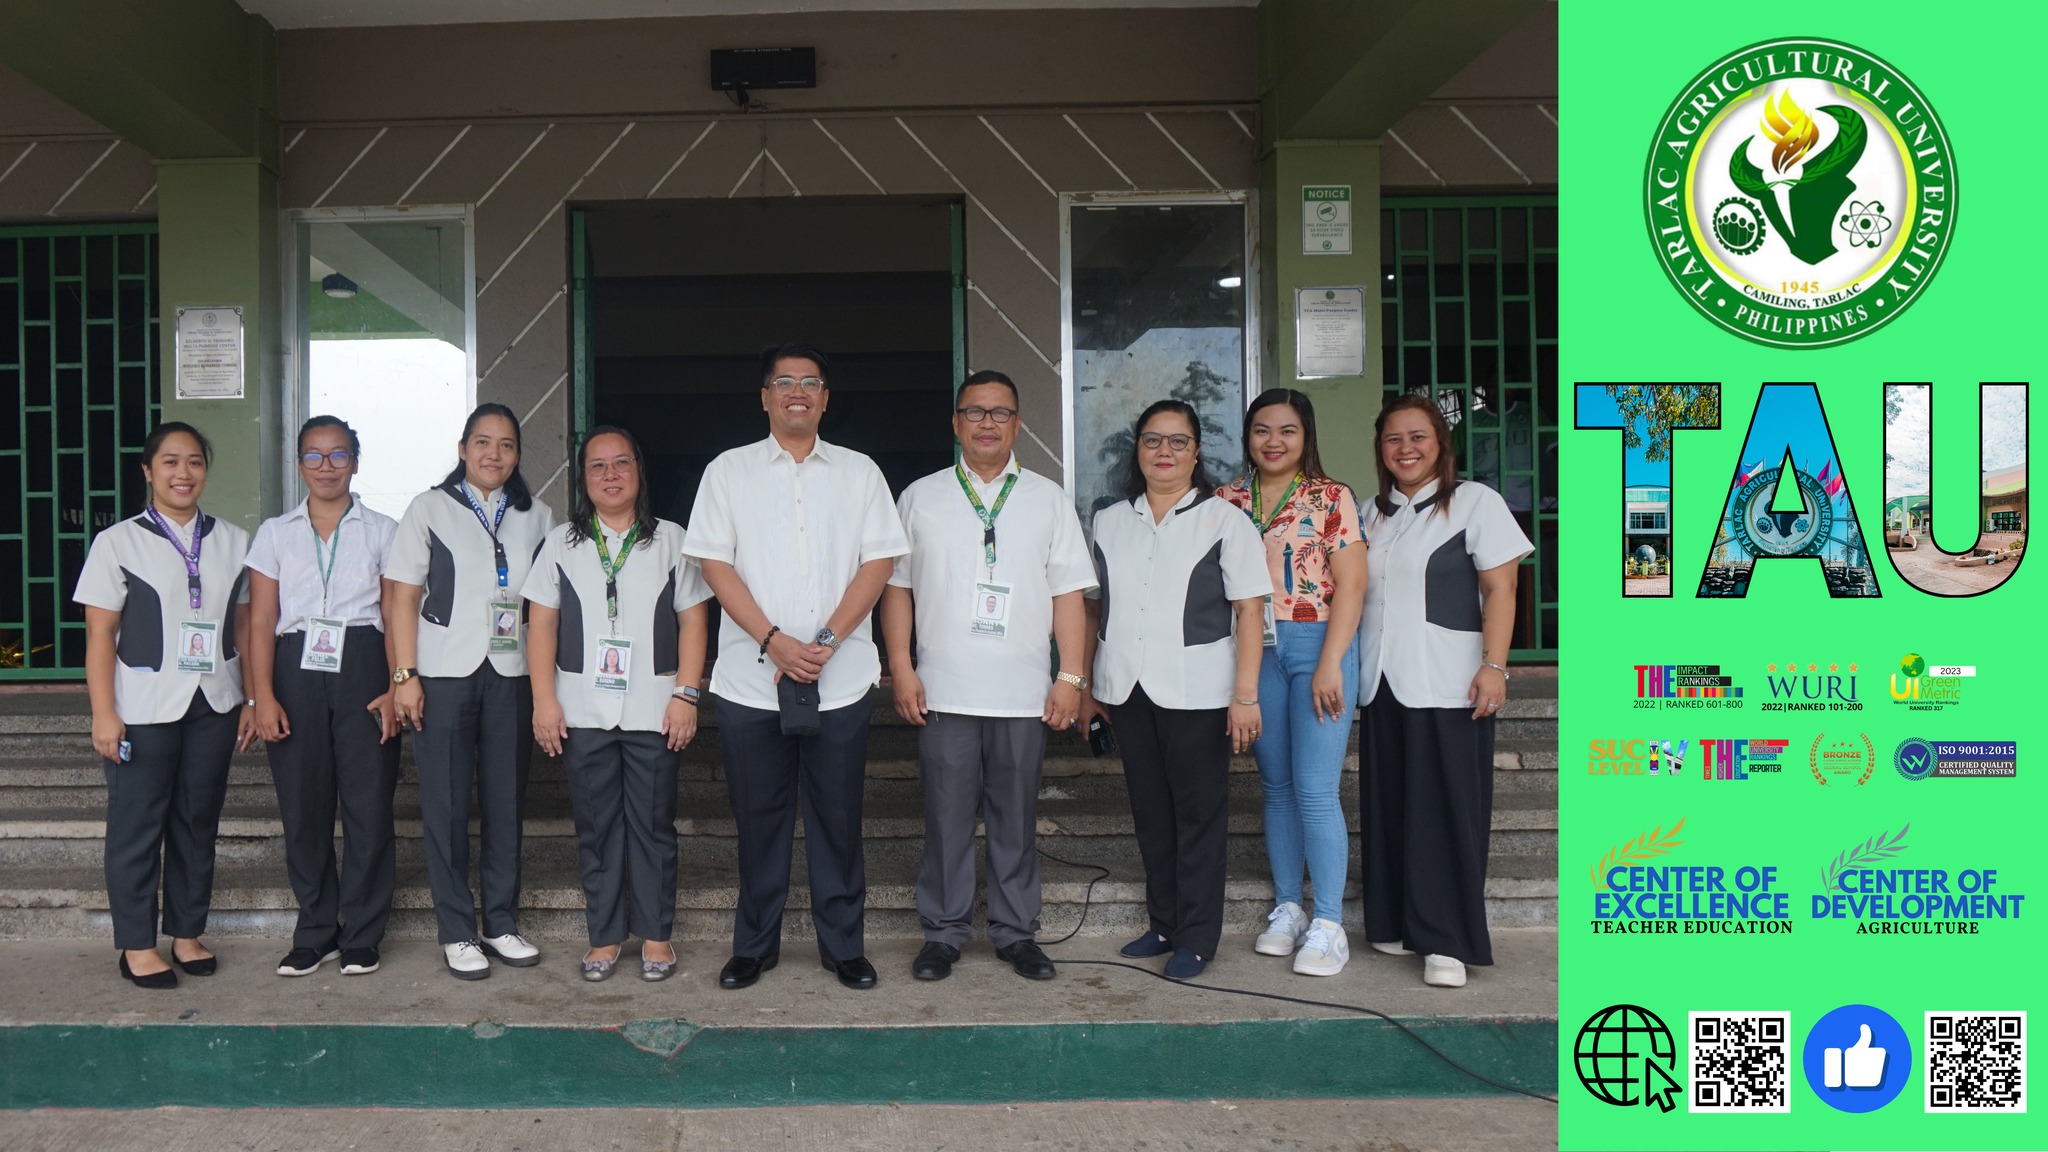 𝐂𝐀𝐏𝐓𝐔𝐑𝐄𝐃 𝐈𝐍 𝐋𝐄𝐍𝐒 | Despite the drizzle due to tropical storm Carina, the Tarlac Agricultural University (TAU) community gathers in front of Gilberto O. Teodoro Multipurpose Center for this week’s flag-raising ceremony, 22 July.